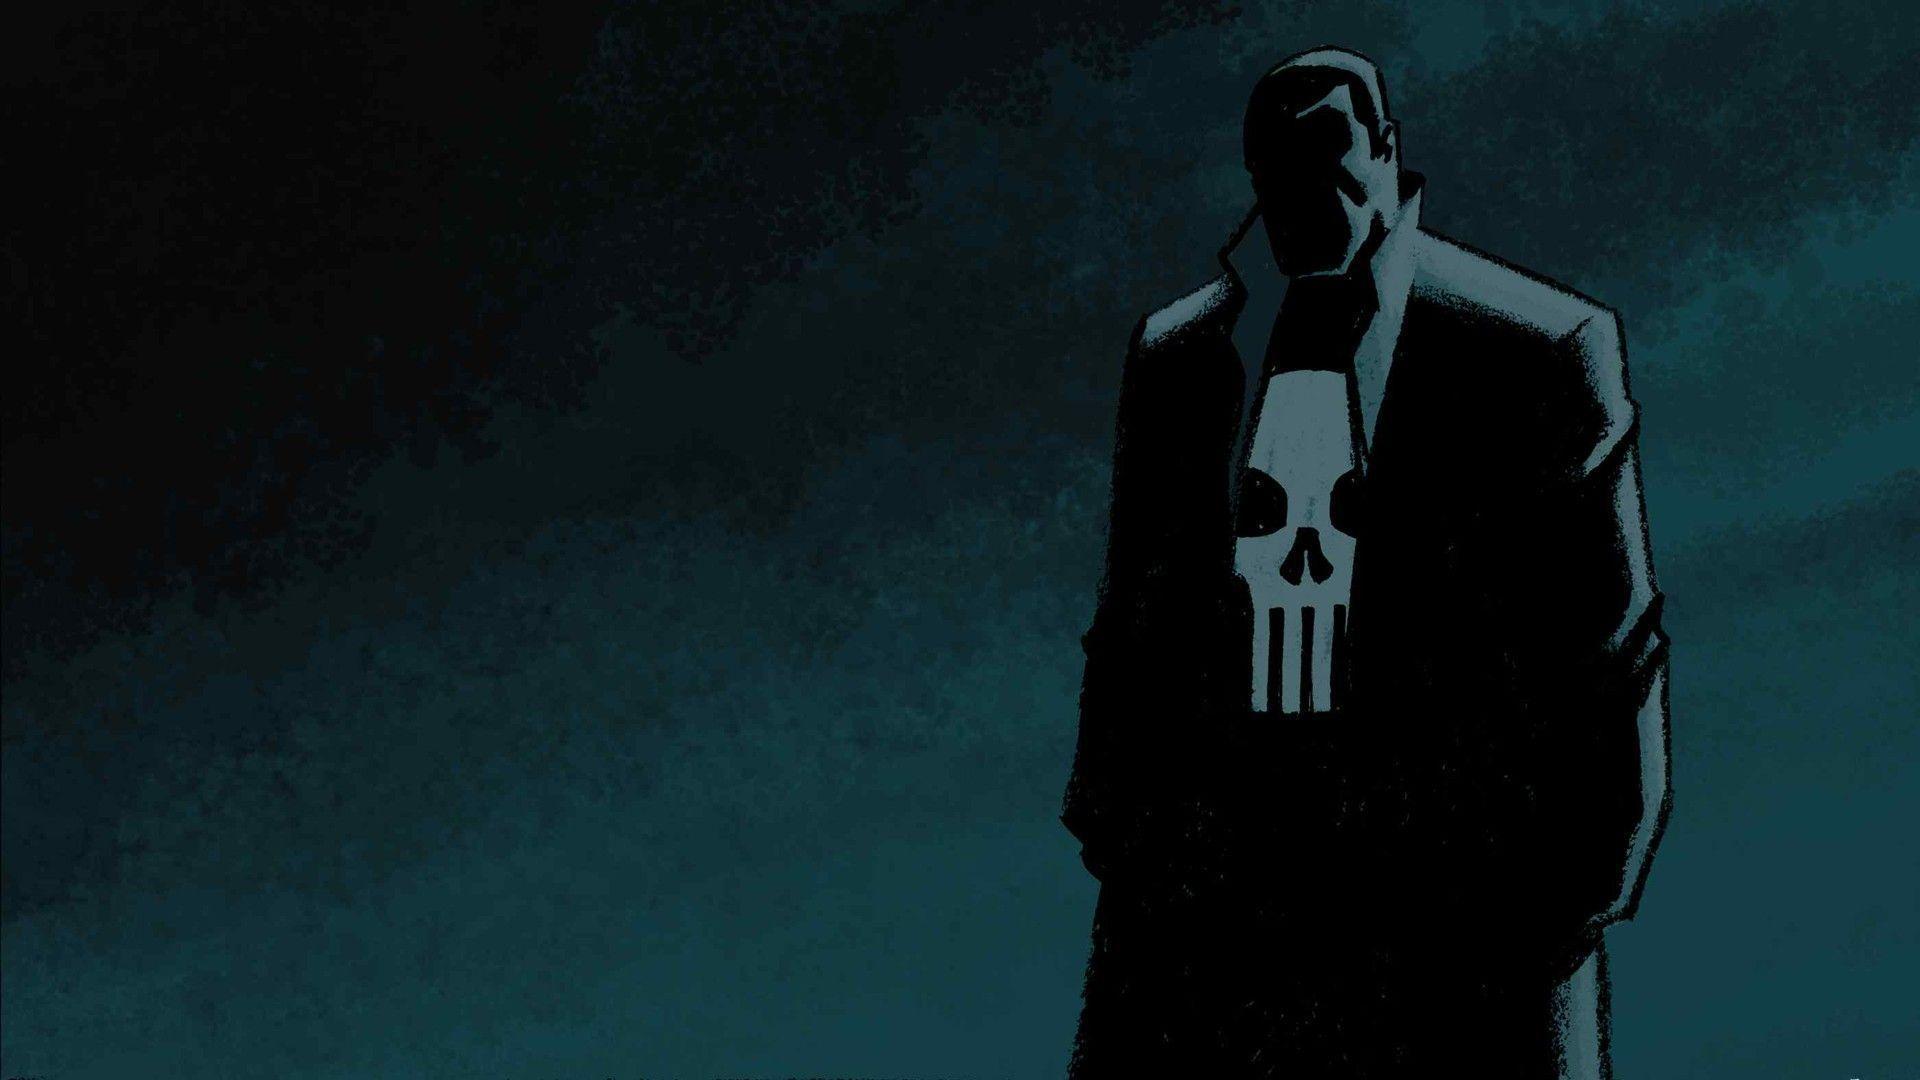 Full View and Download The Punisher 4 Wallpaper 1920x1080. Hot HD